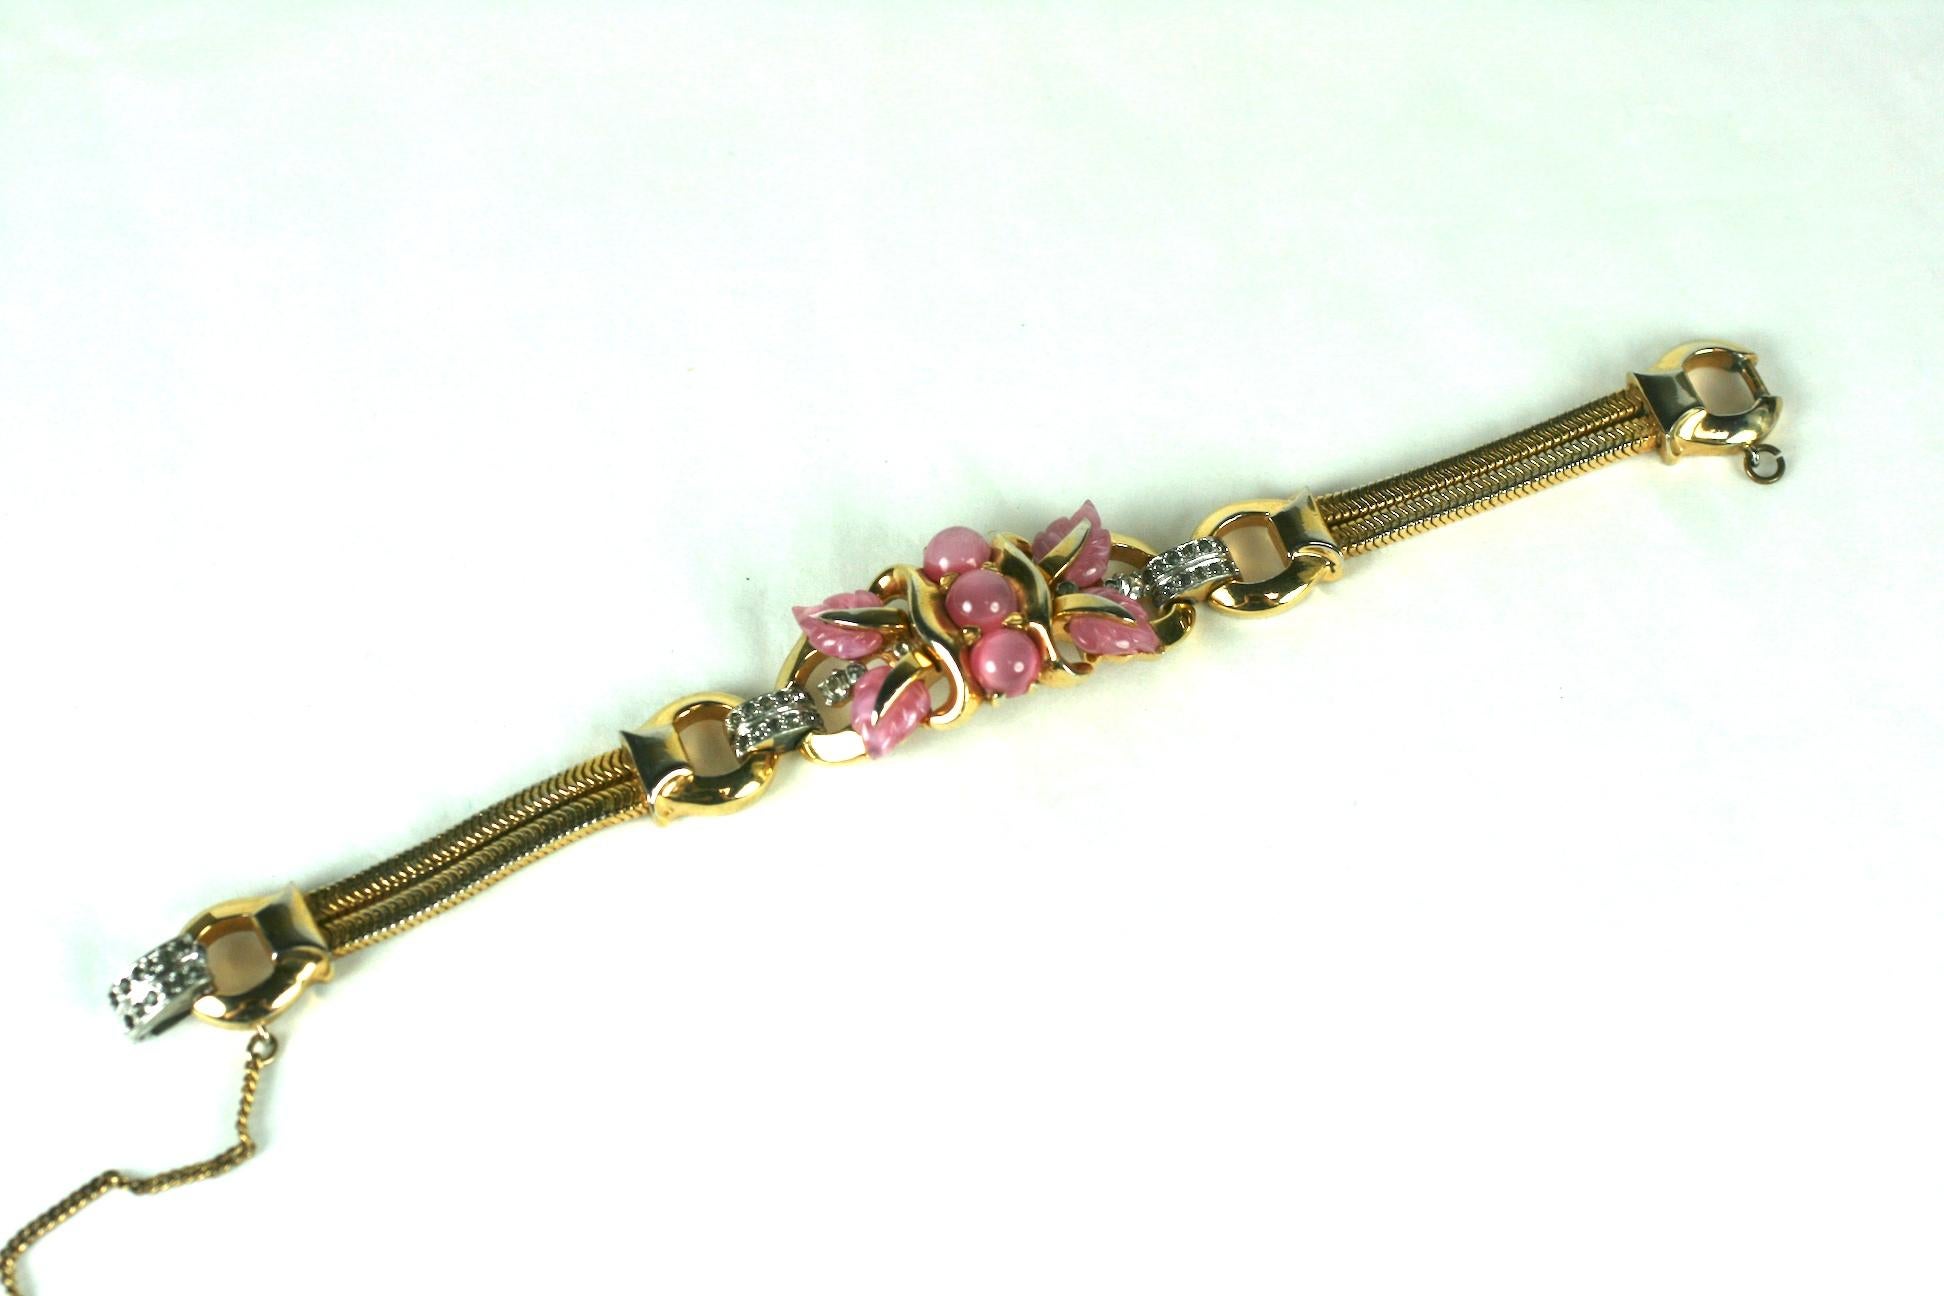 Mazer Fruit Salad Bracelet from the 1940's with pearlized pink florals mixed with pave accents. Central motif linked to 2 gilt tank chains and clasp. Signed 